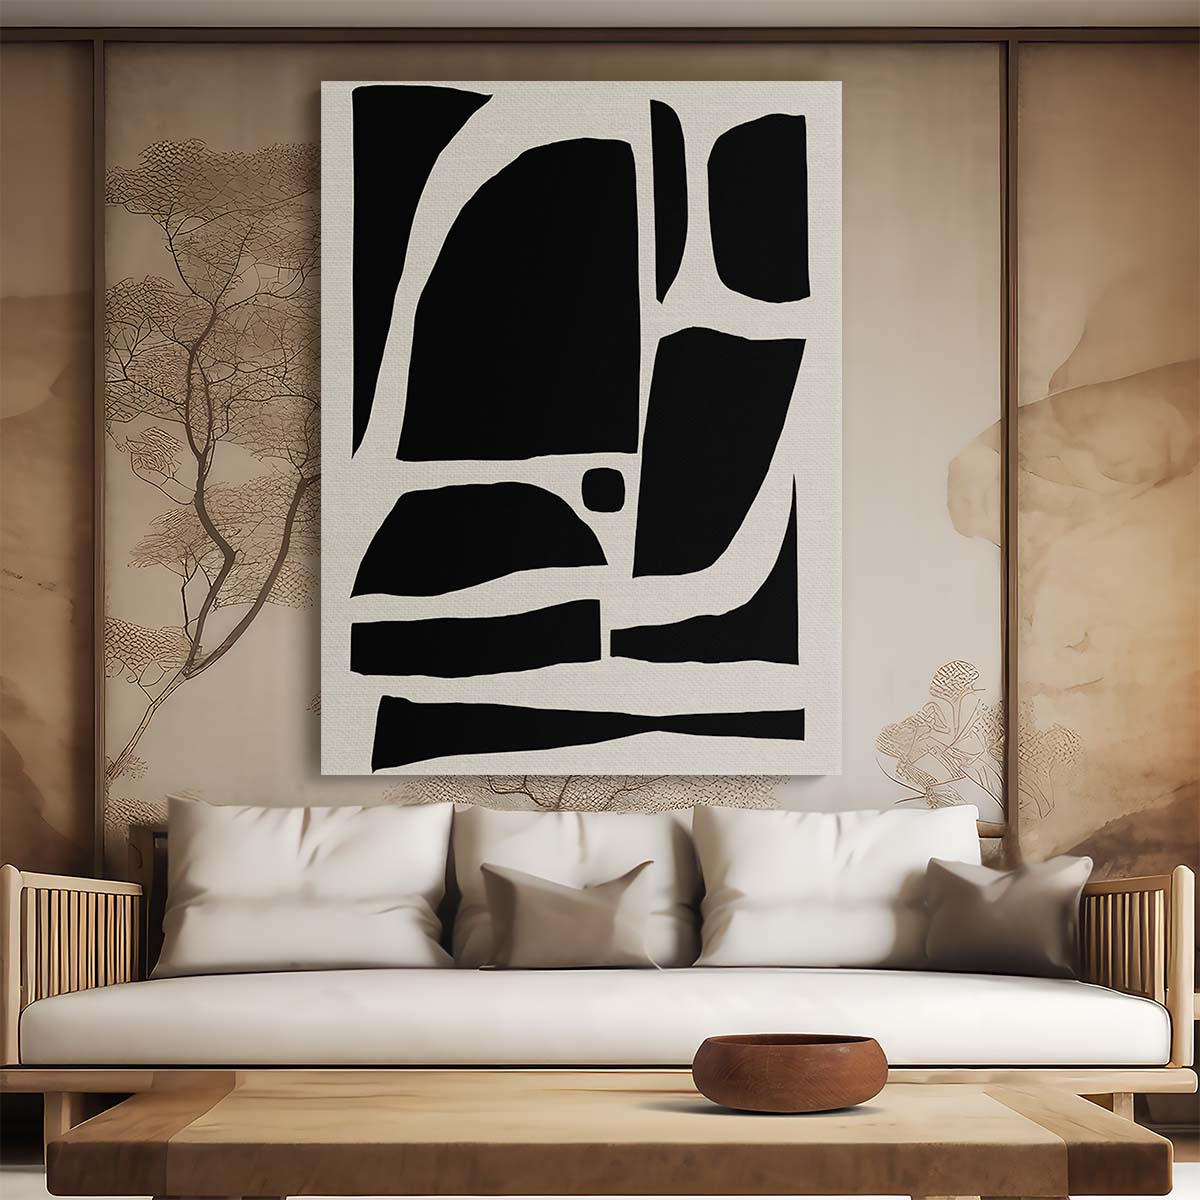 Dan Hobday Contemporary Abstract Geometric Illustration Wall Art by Luxuriance Designs, made in USA